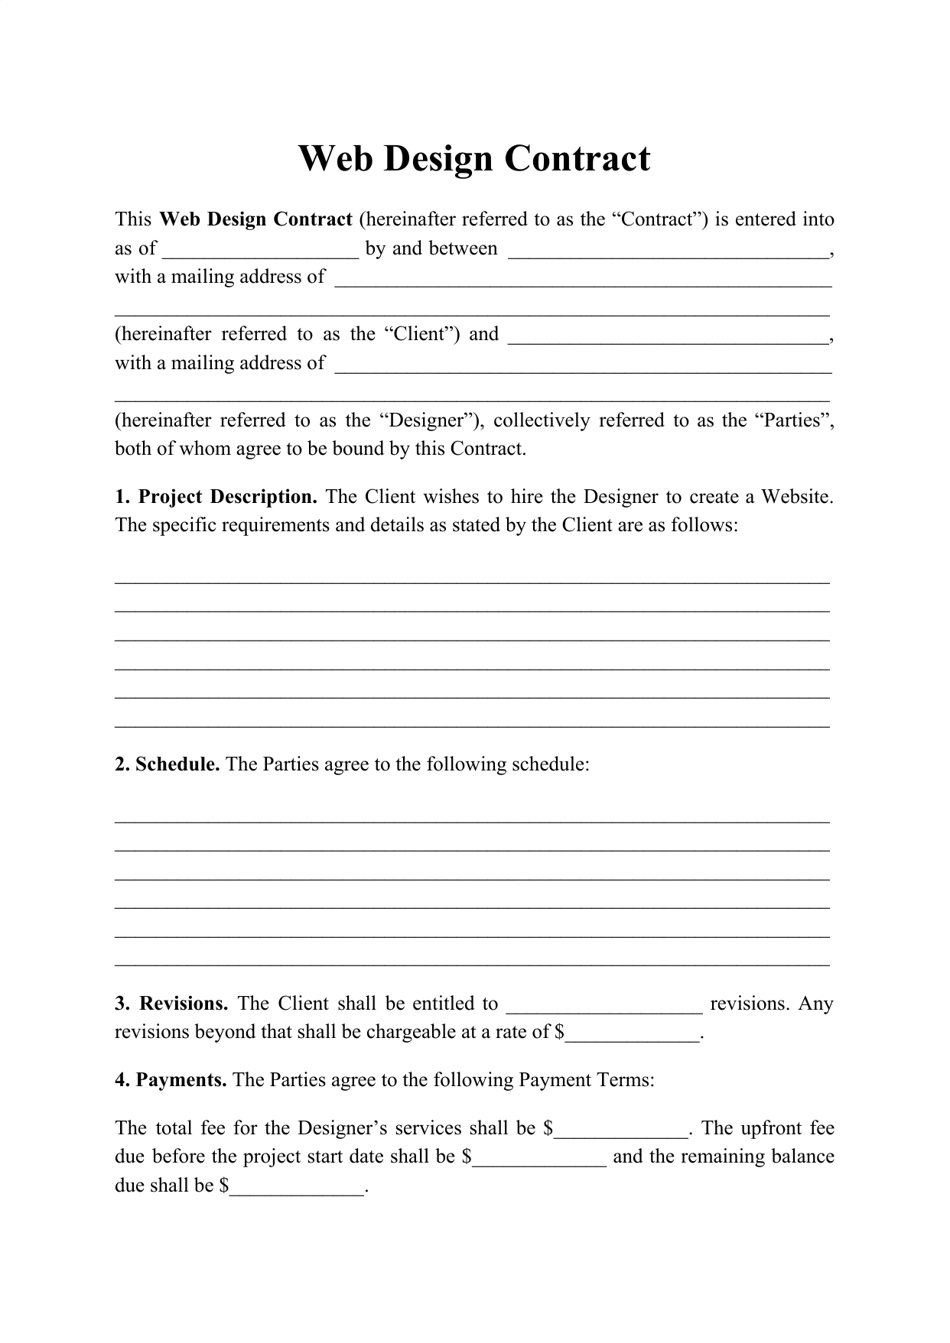 Web Design Contract Template, Page 1